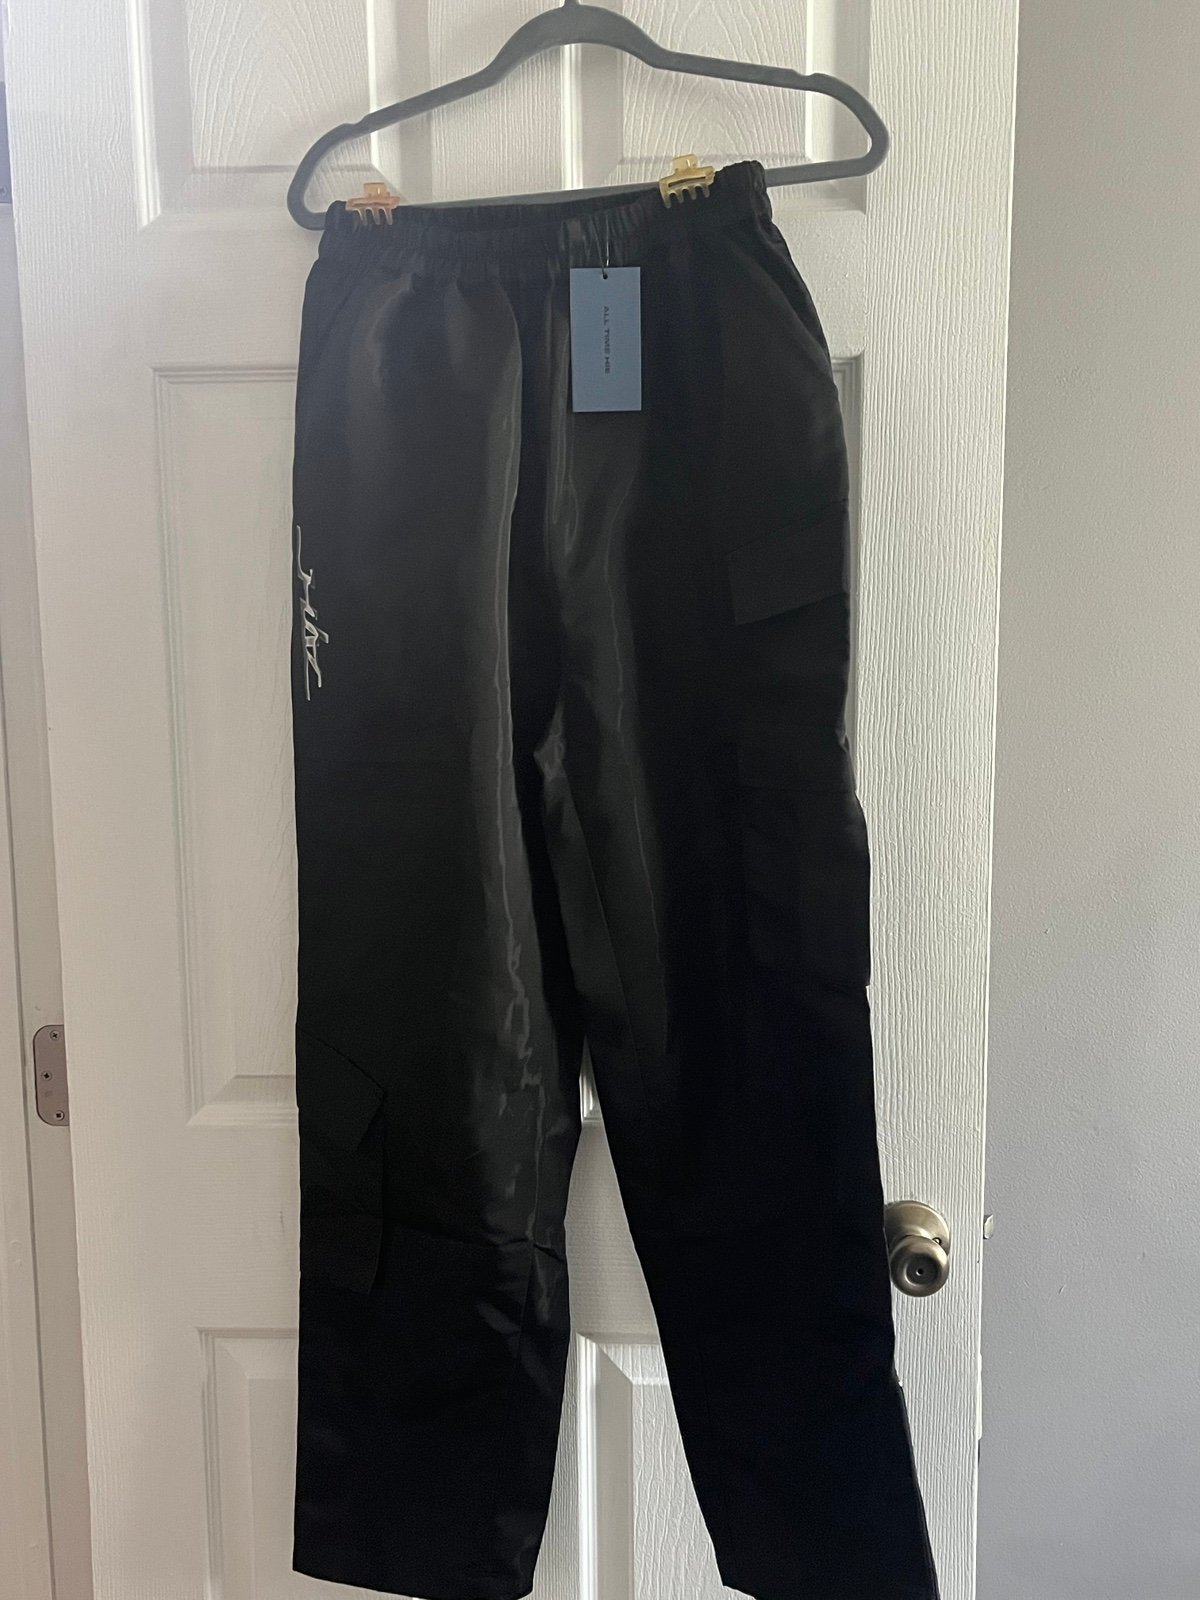 Authentic womens cargo pants NdUhzMWIr Outlet Store